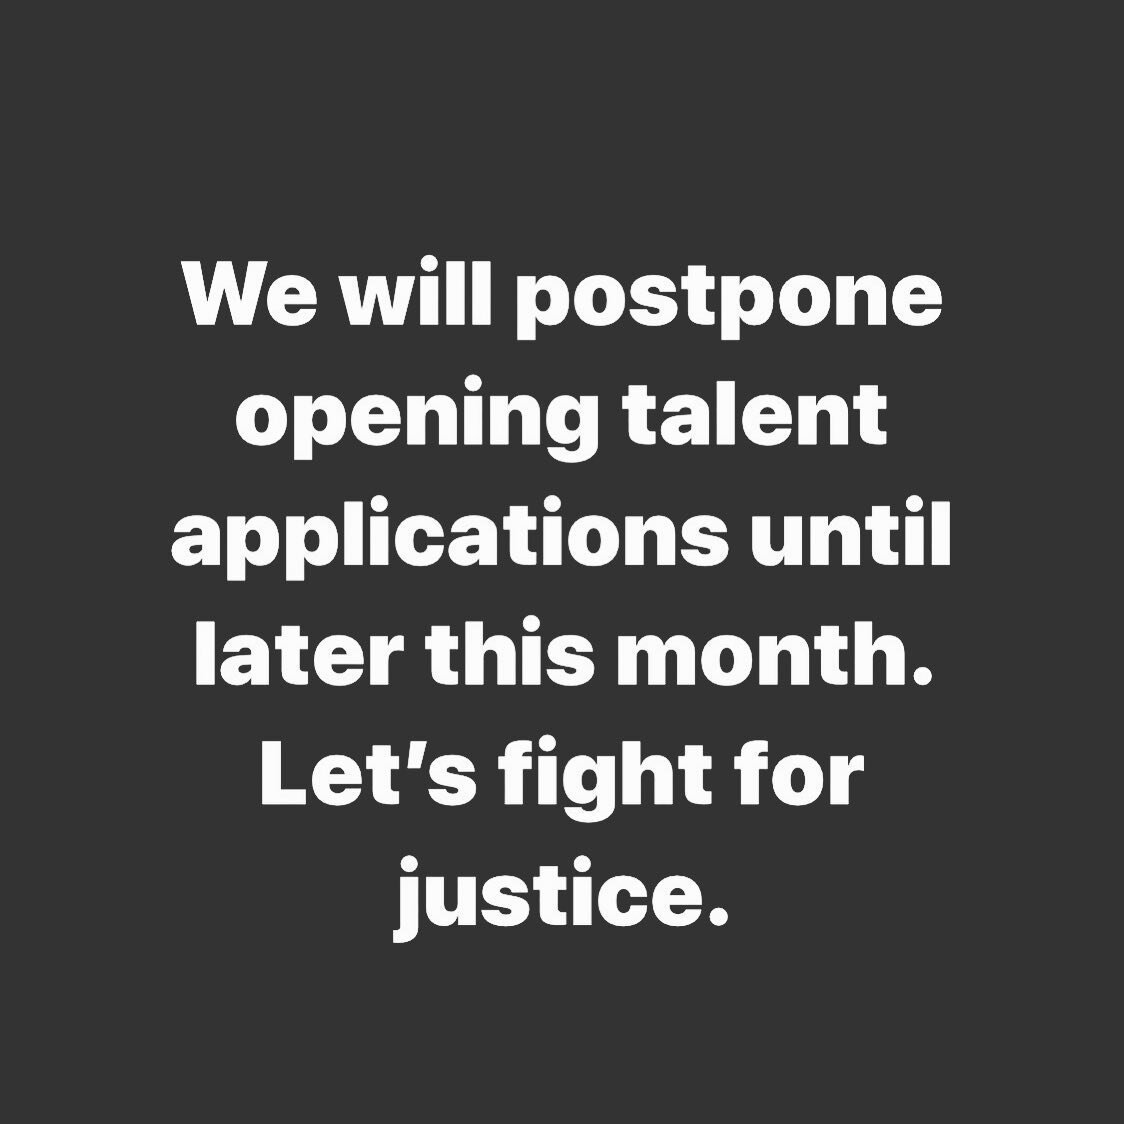 We&rsquo;ve decided to delay opening our talent applications for a few weeks. Our collective energy needs to be directed towards fighting for justice. Please stay safe, we love y&rsquo;all.